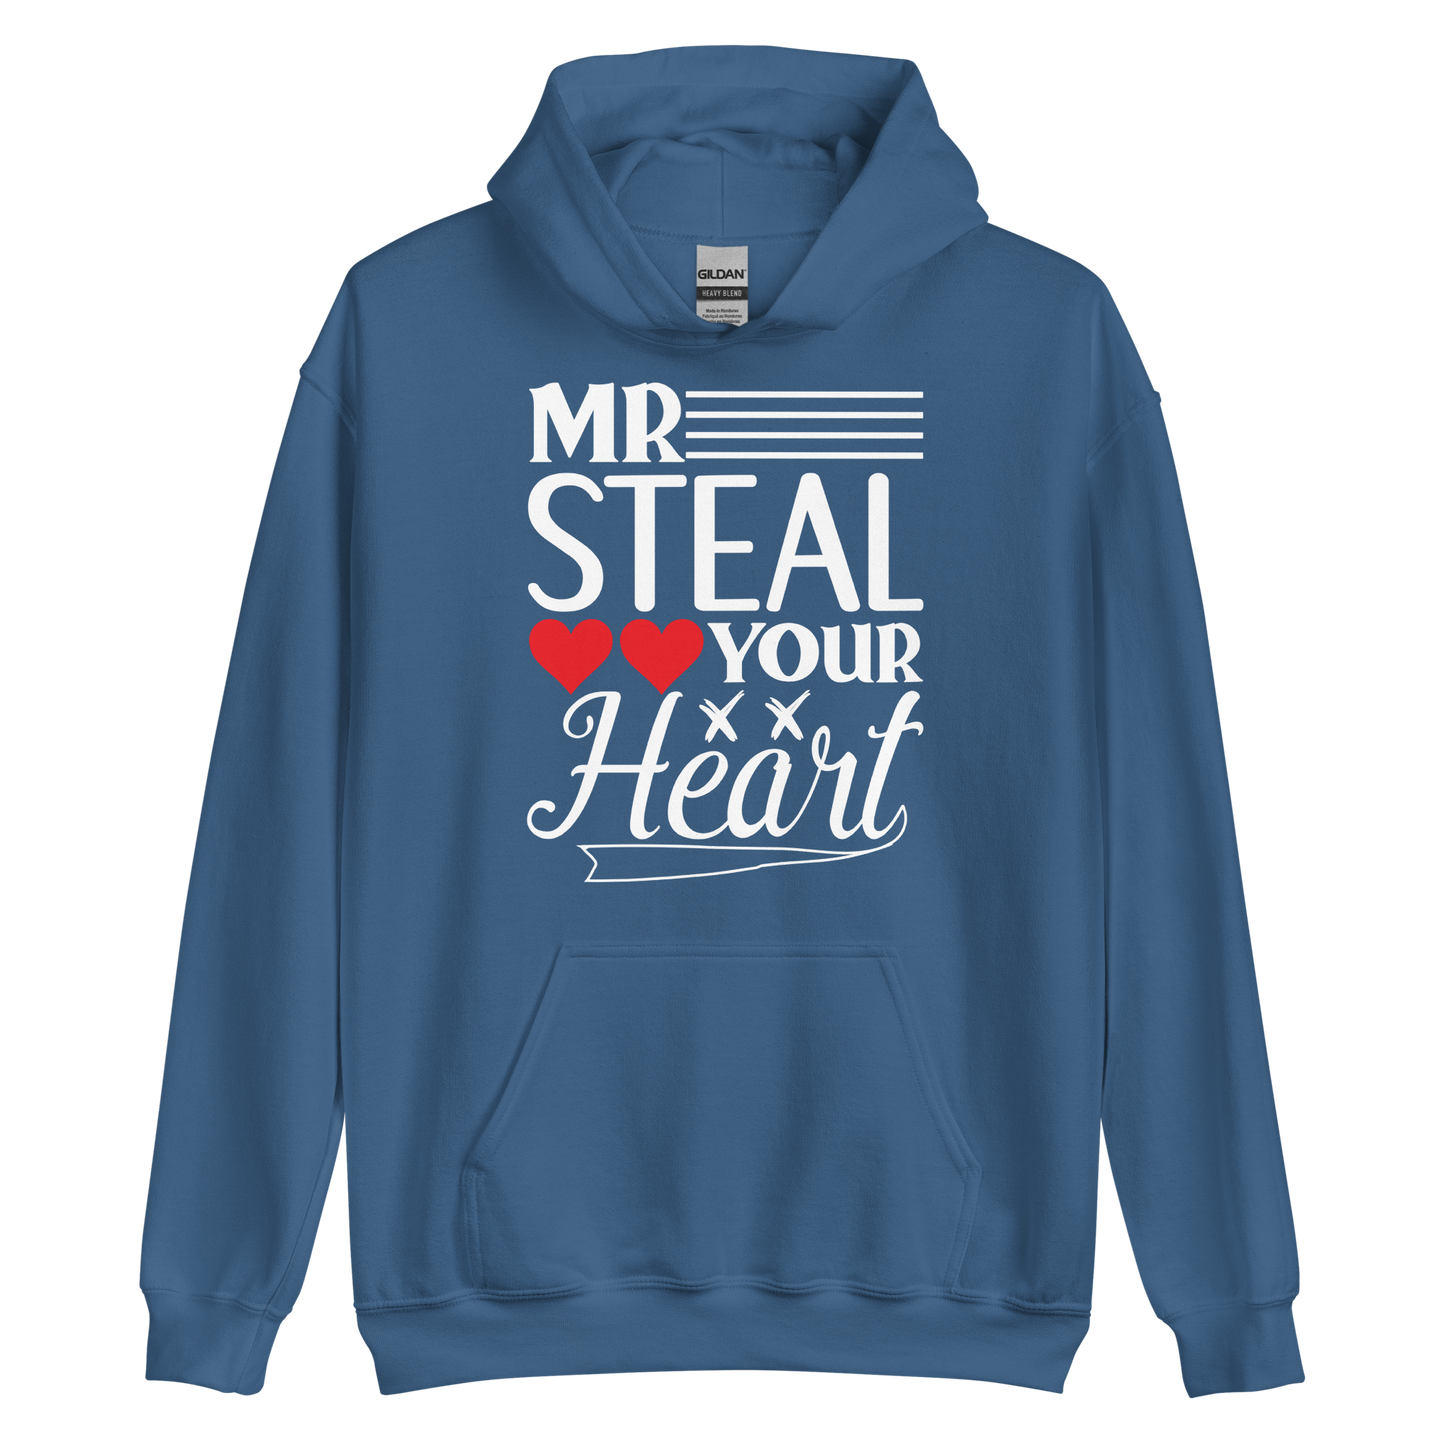 Mr. Steal Your Heart Hoodie S4